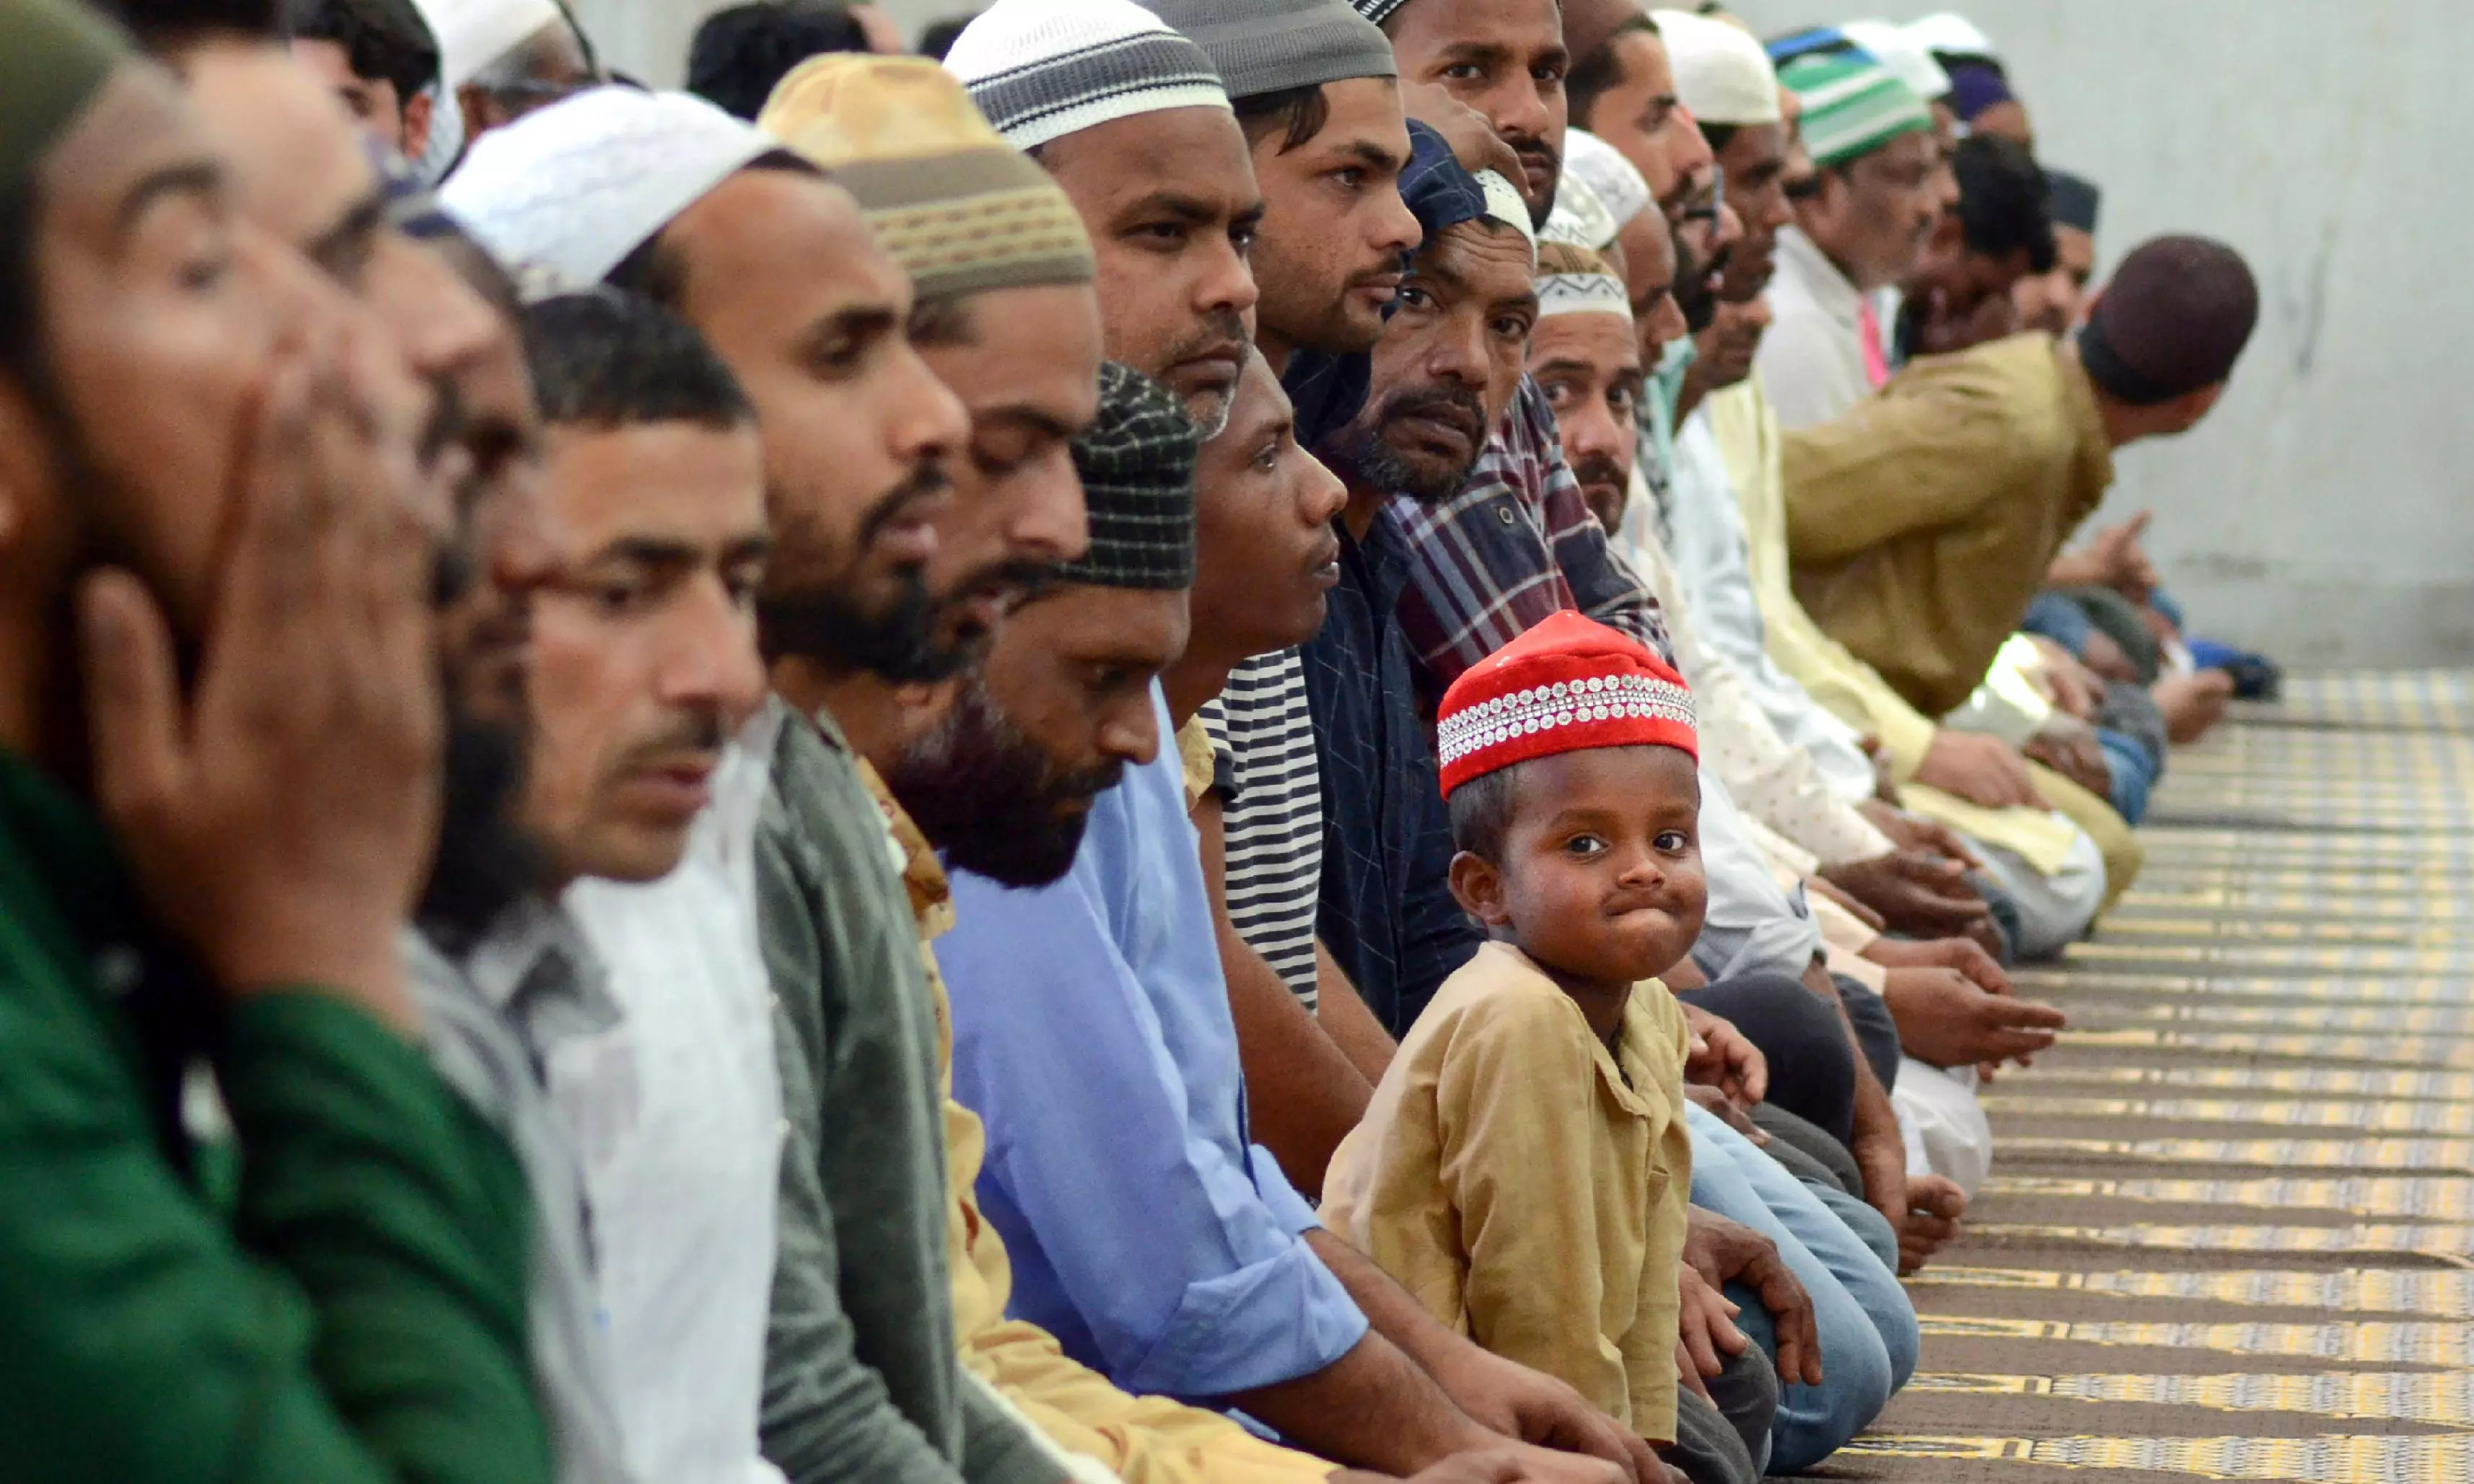 Mosques See Huge Turnout as Ramzan Enters Last Days